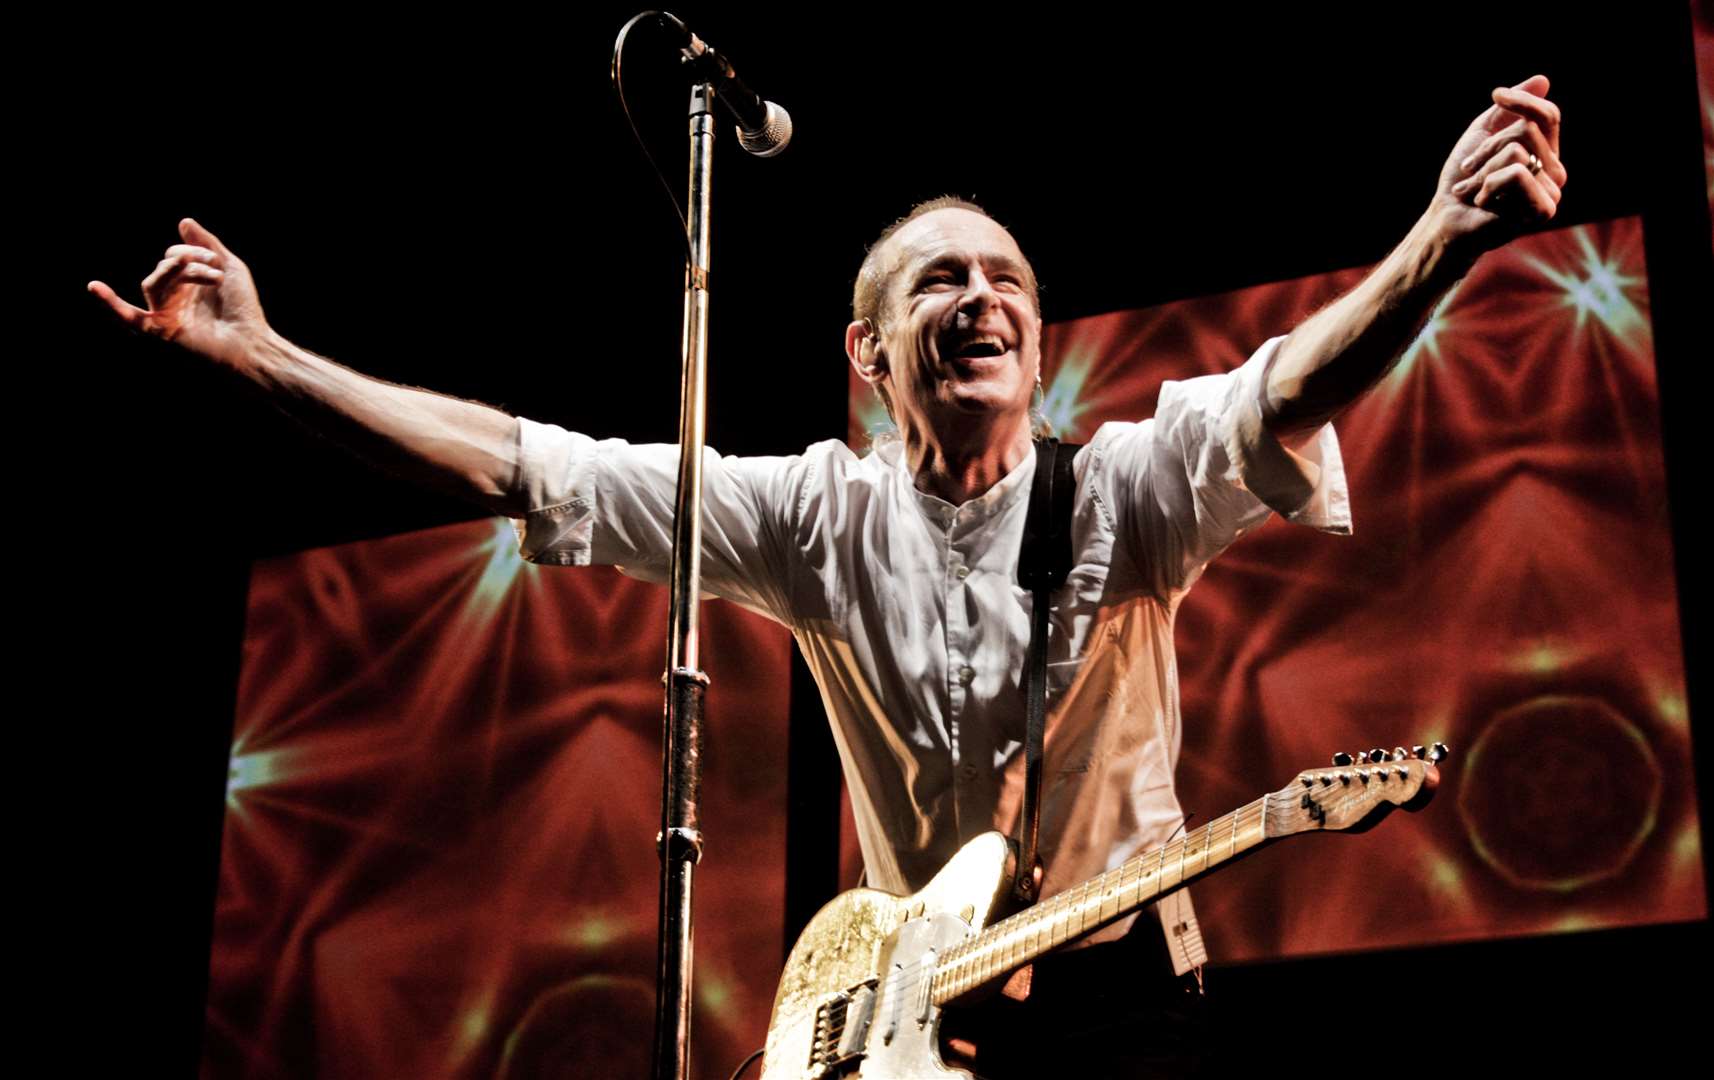 Francis Rossi will be sharing his stories